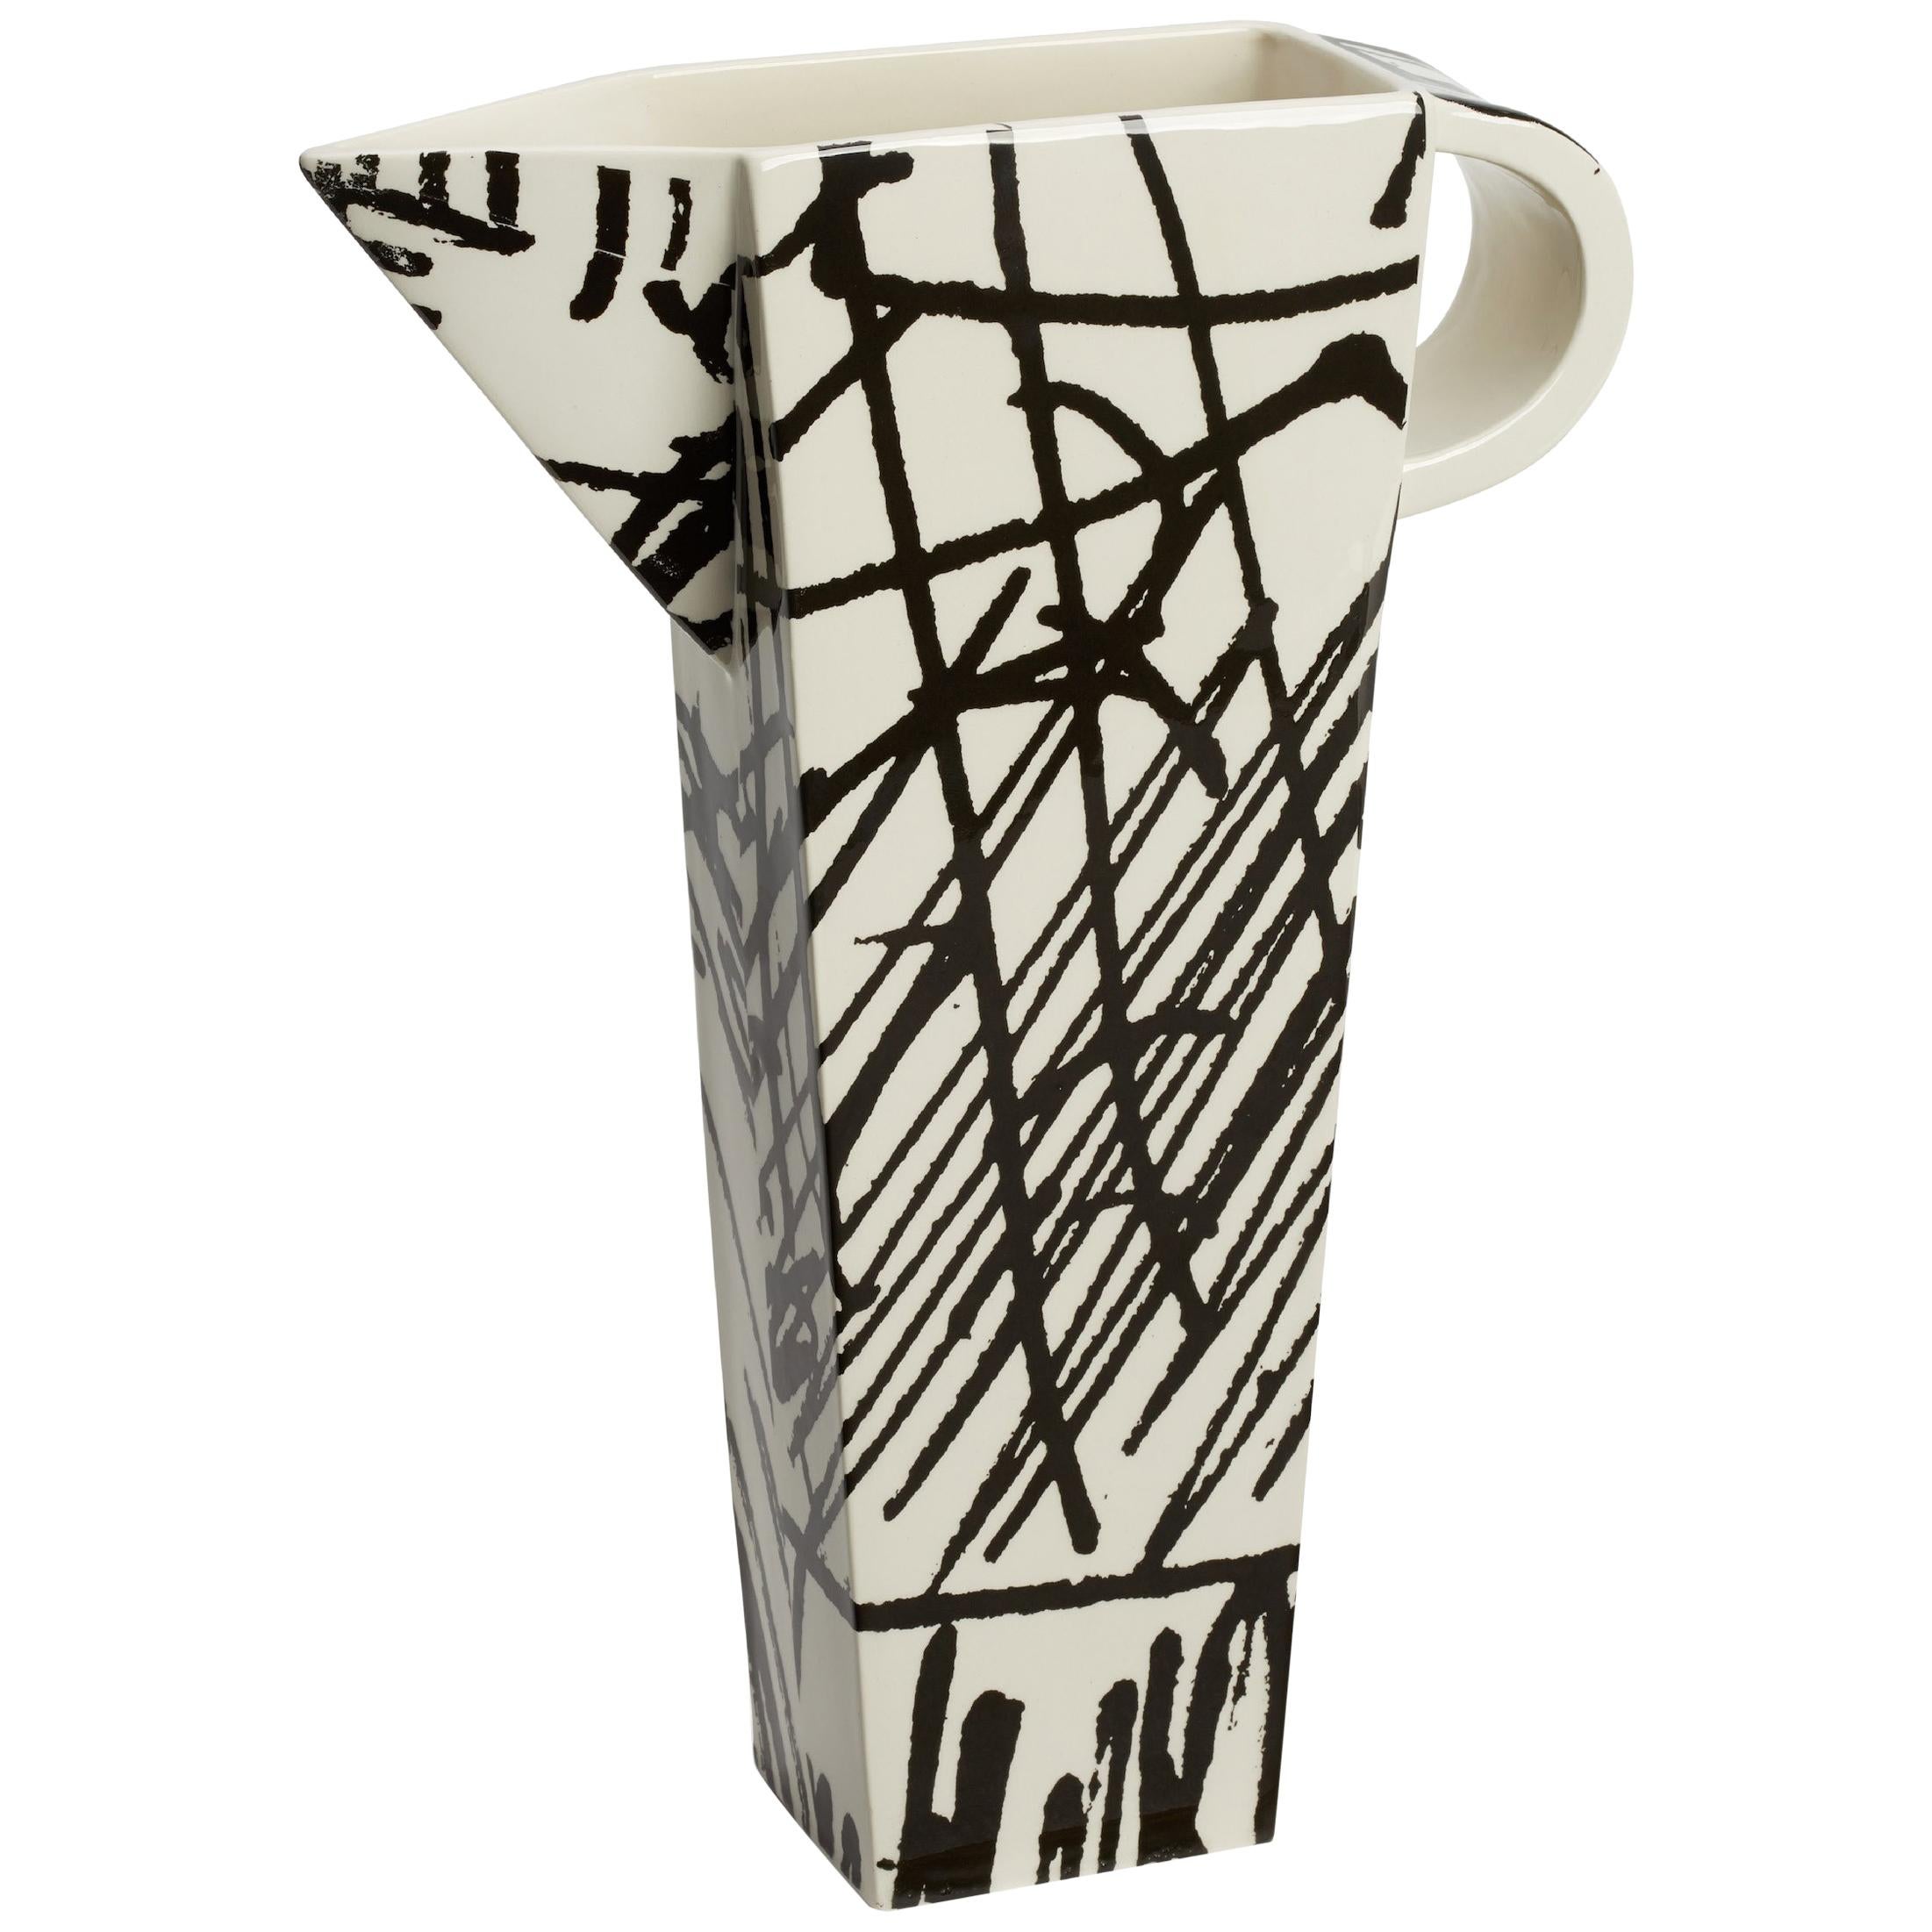 White Ceramic Production Jug 02 with Black Silk Screen Decals For Sale